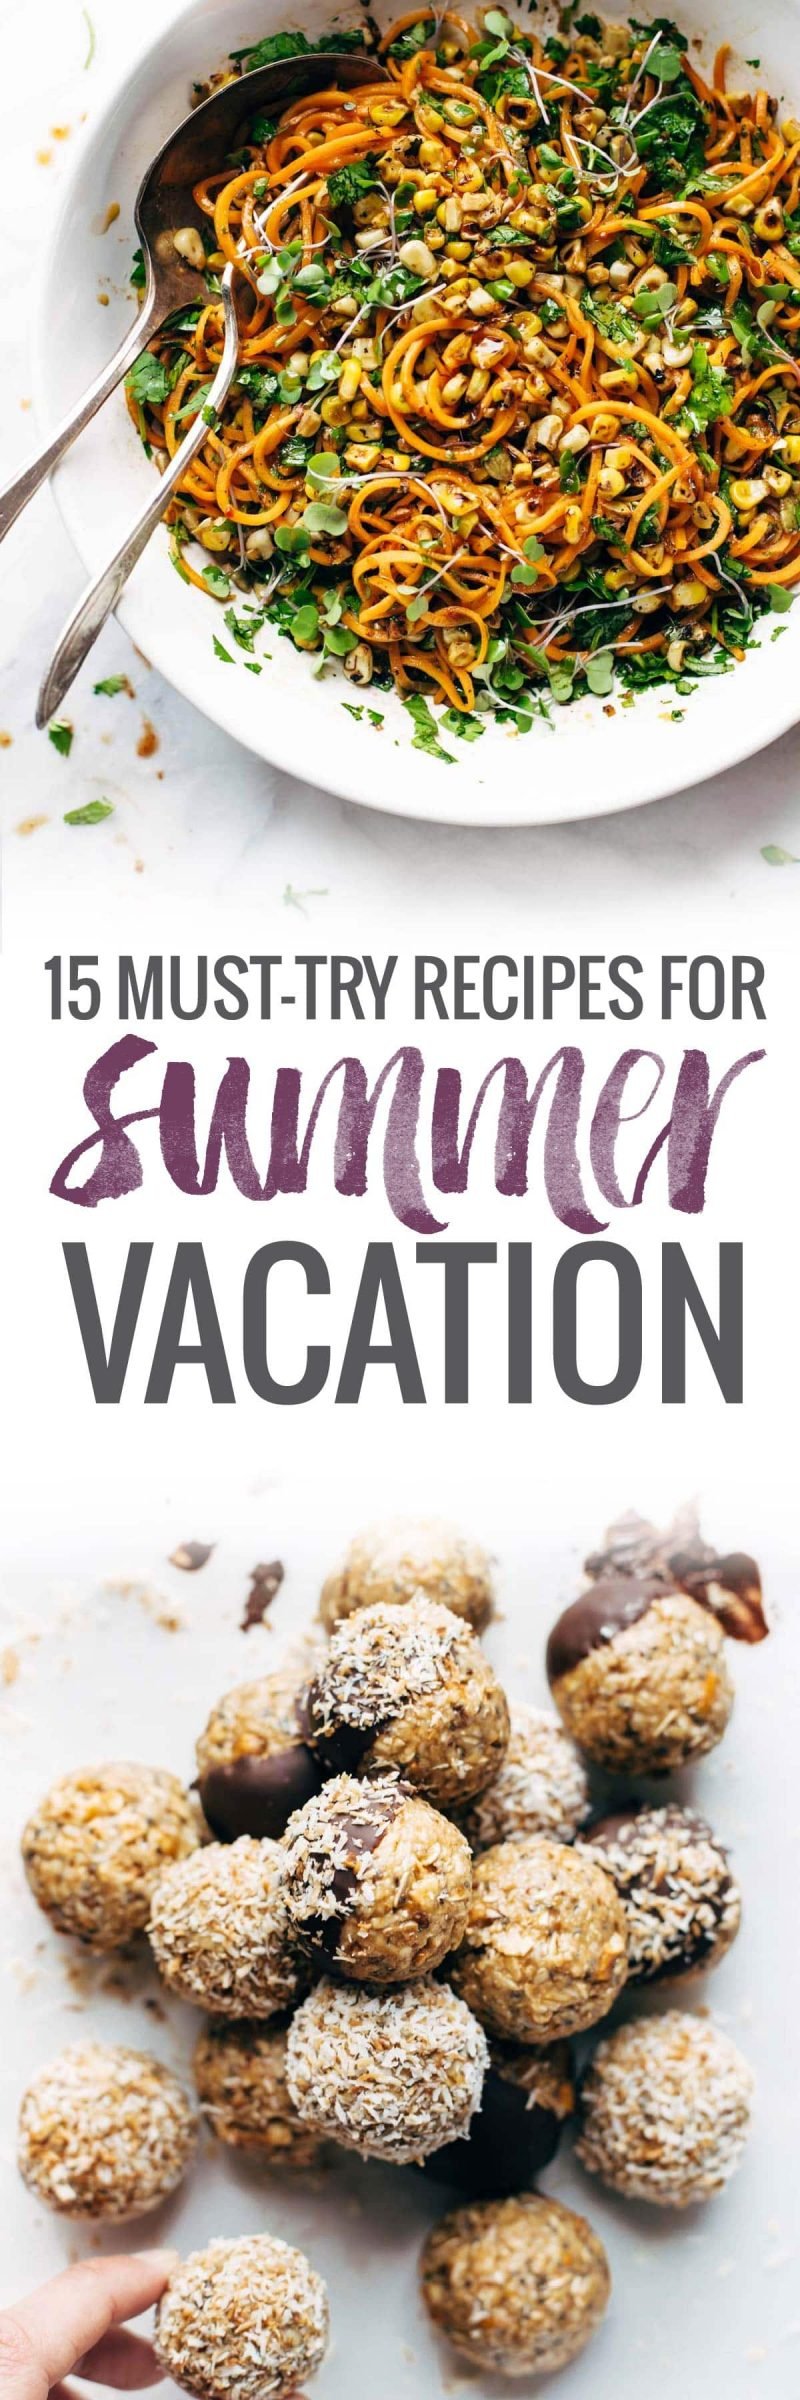 15 Must-Try Recipes for Your Summer Vacation.